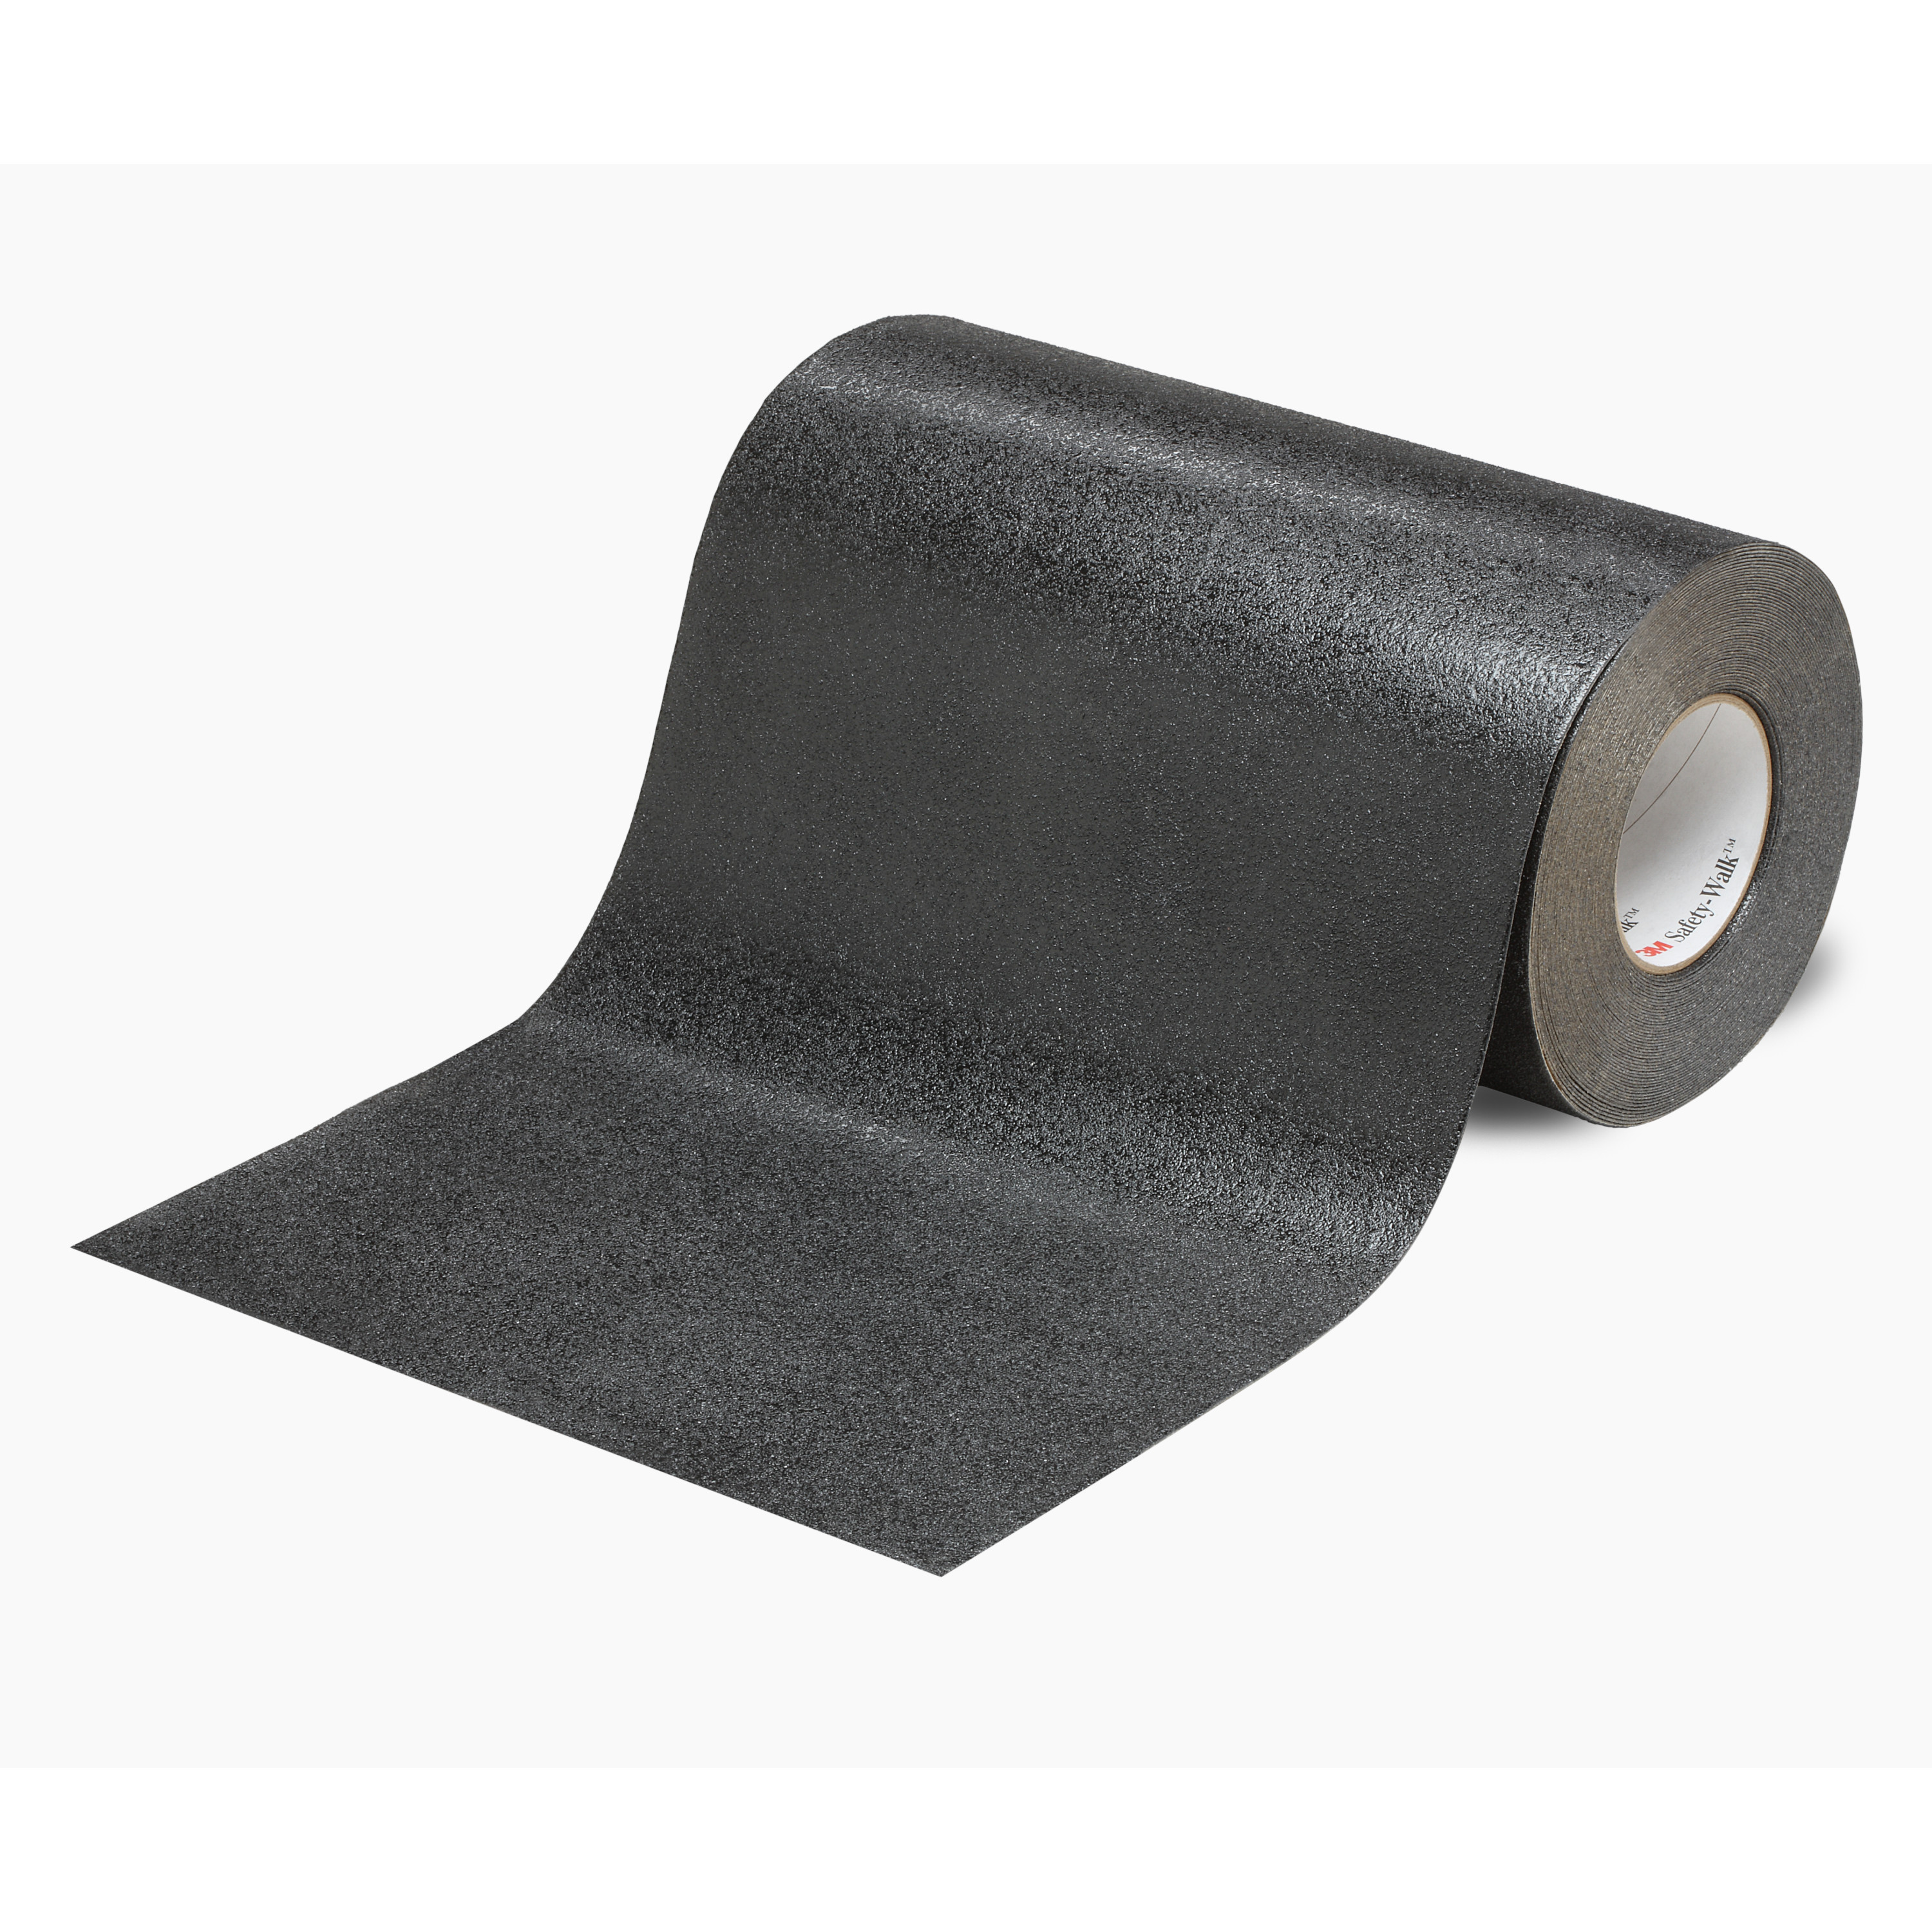 3M™ Safety Walk™ Slip-Resistant Conformable Tapes & Treads 510,
BAMS-535-006, Configurable Roll